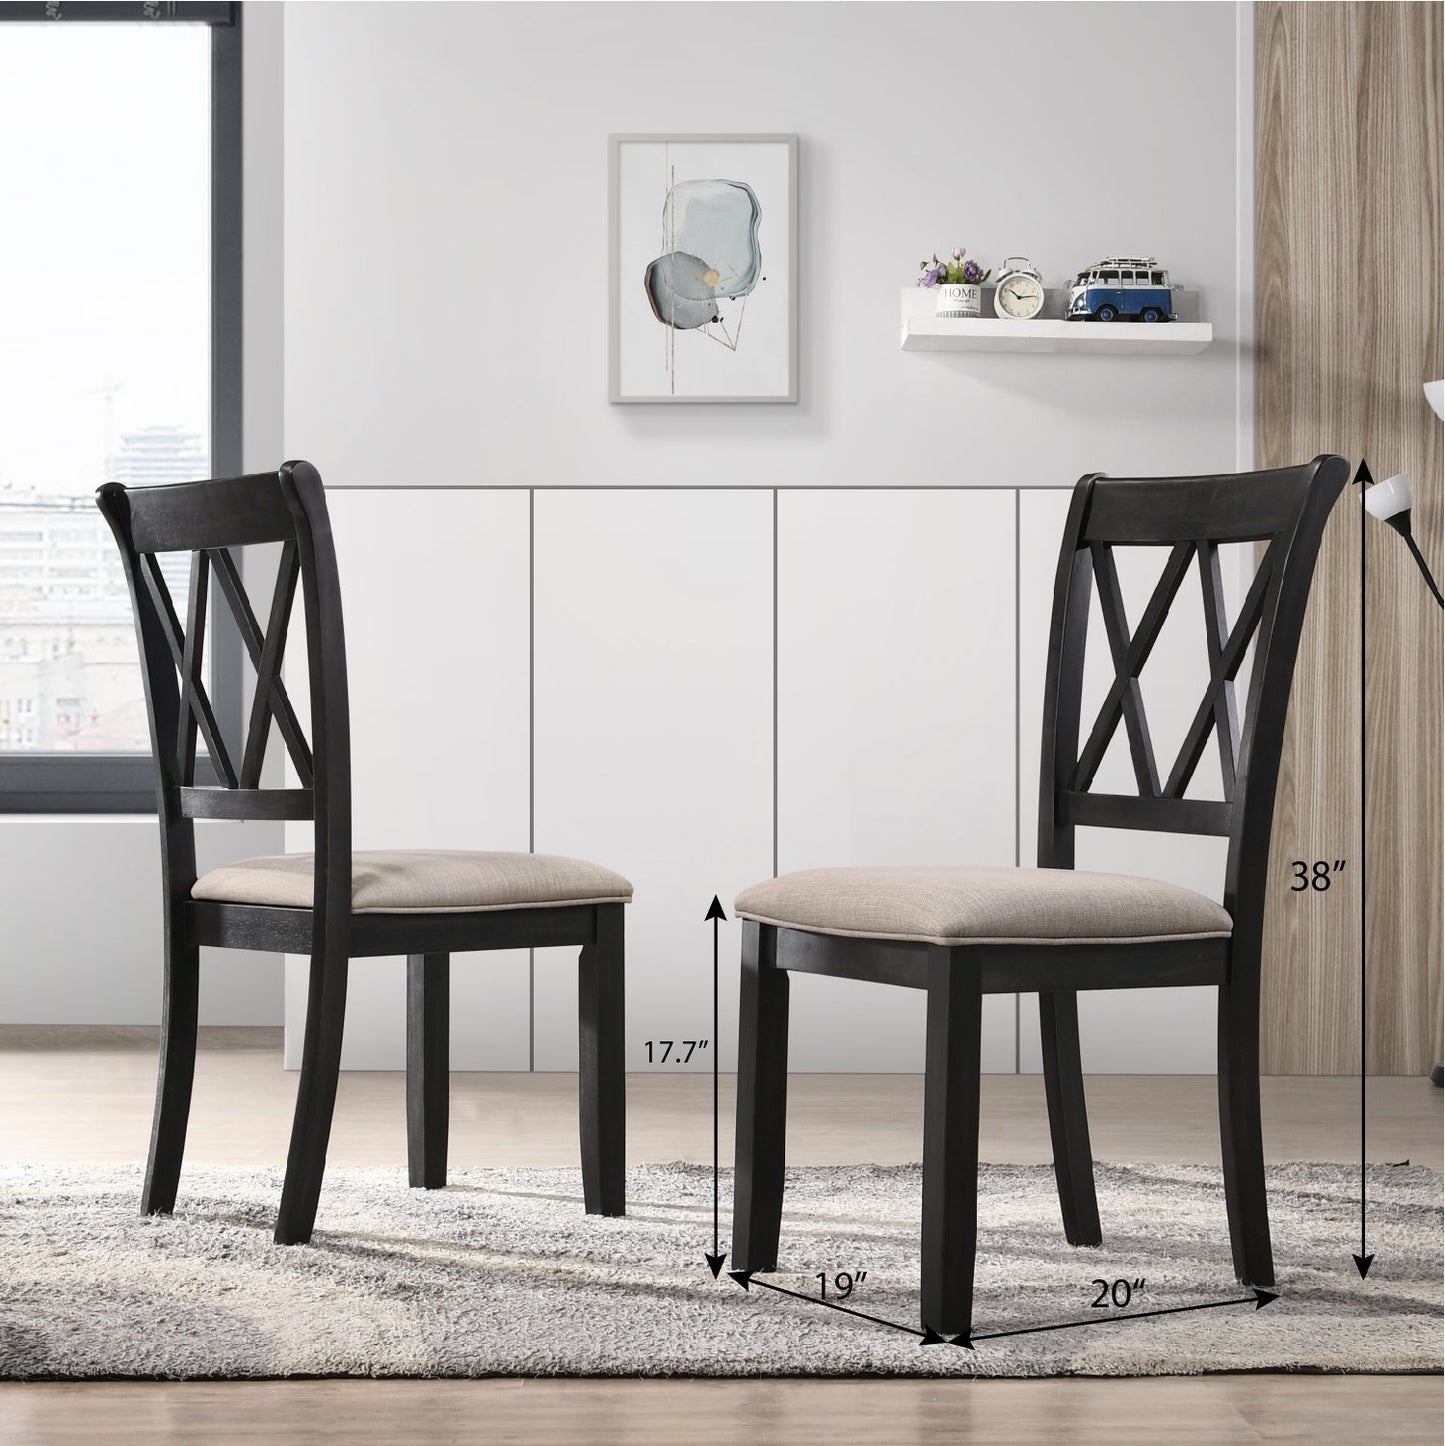 Windvale Fabric Upholstered Dining Chair in Black, Set of 2